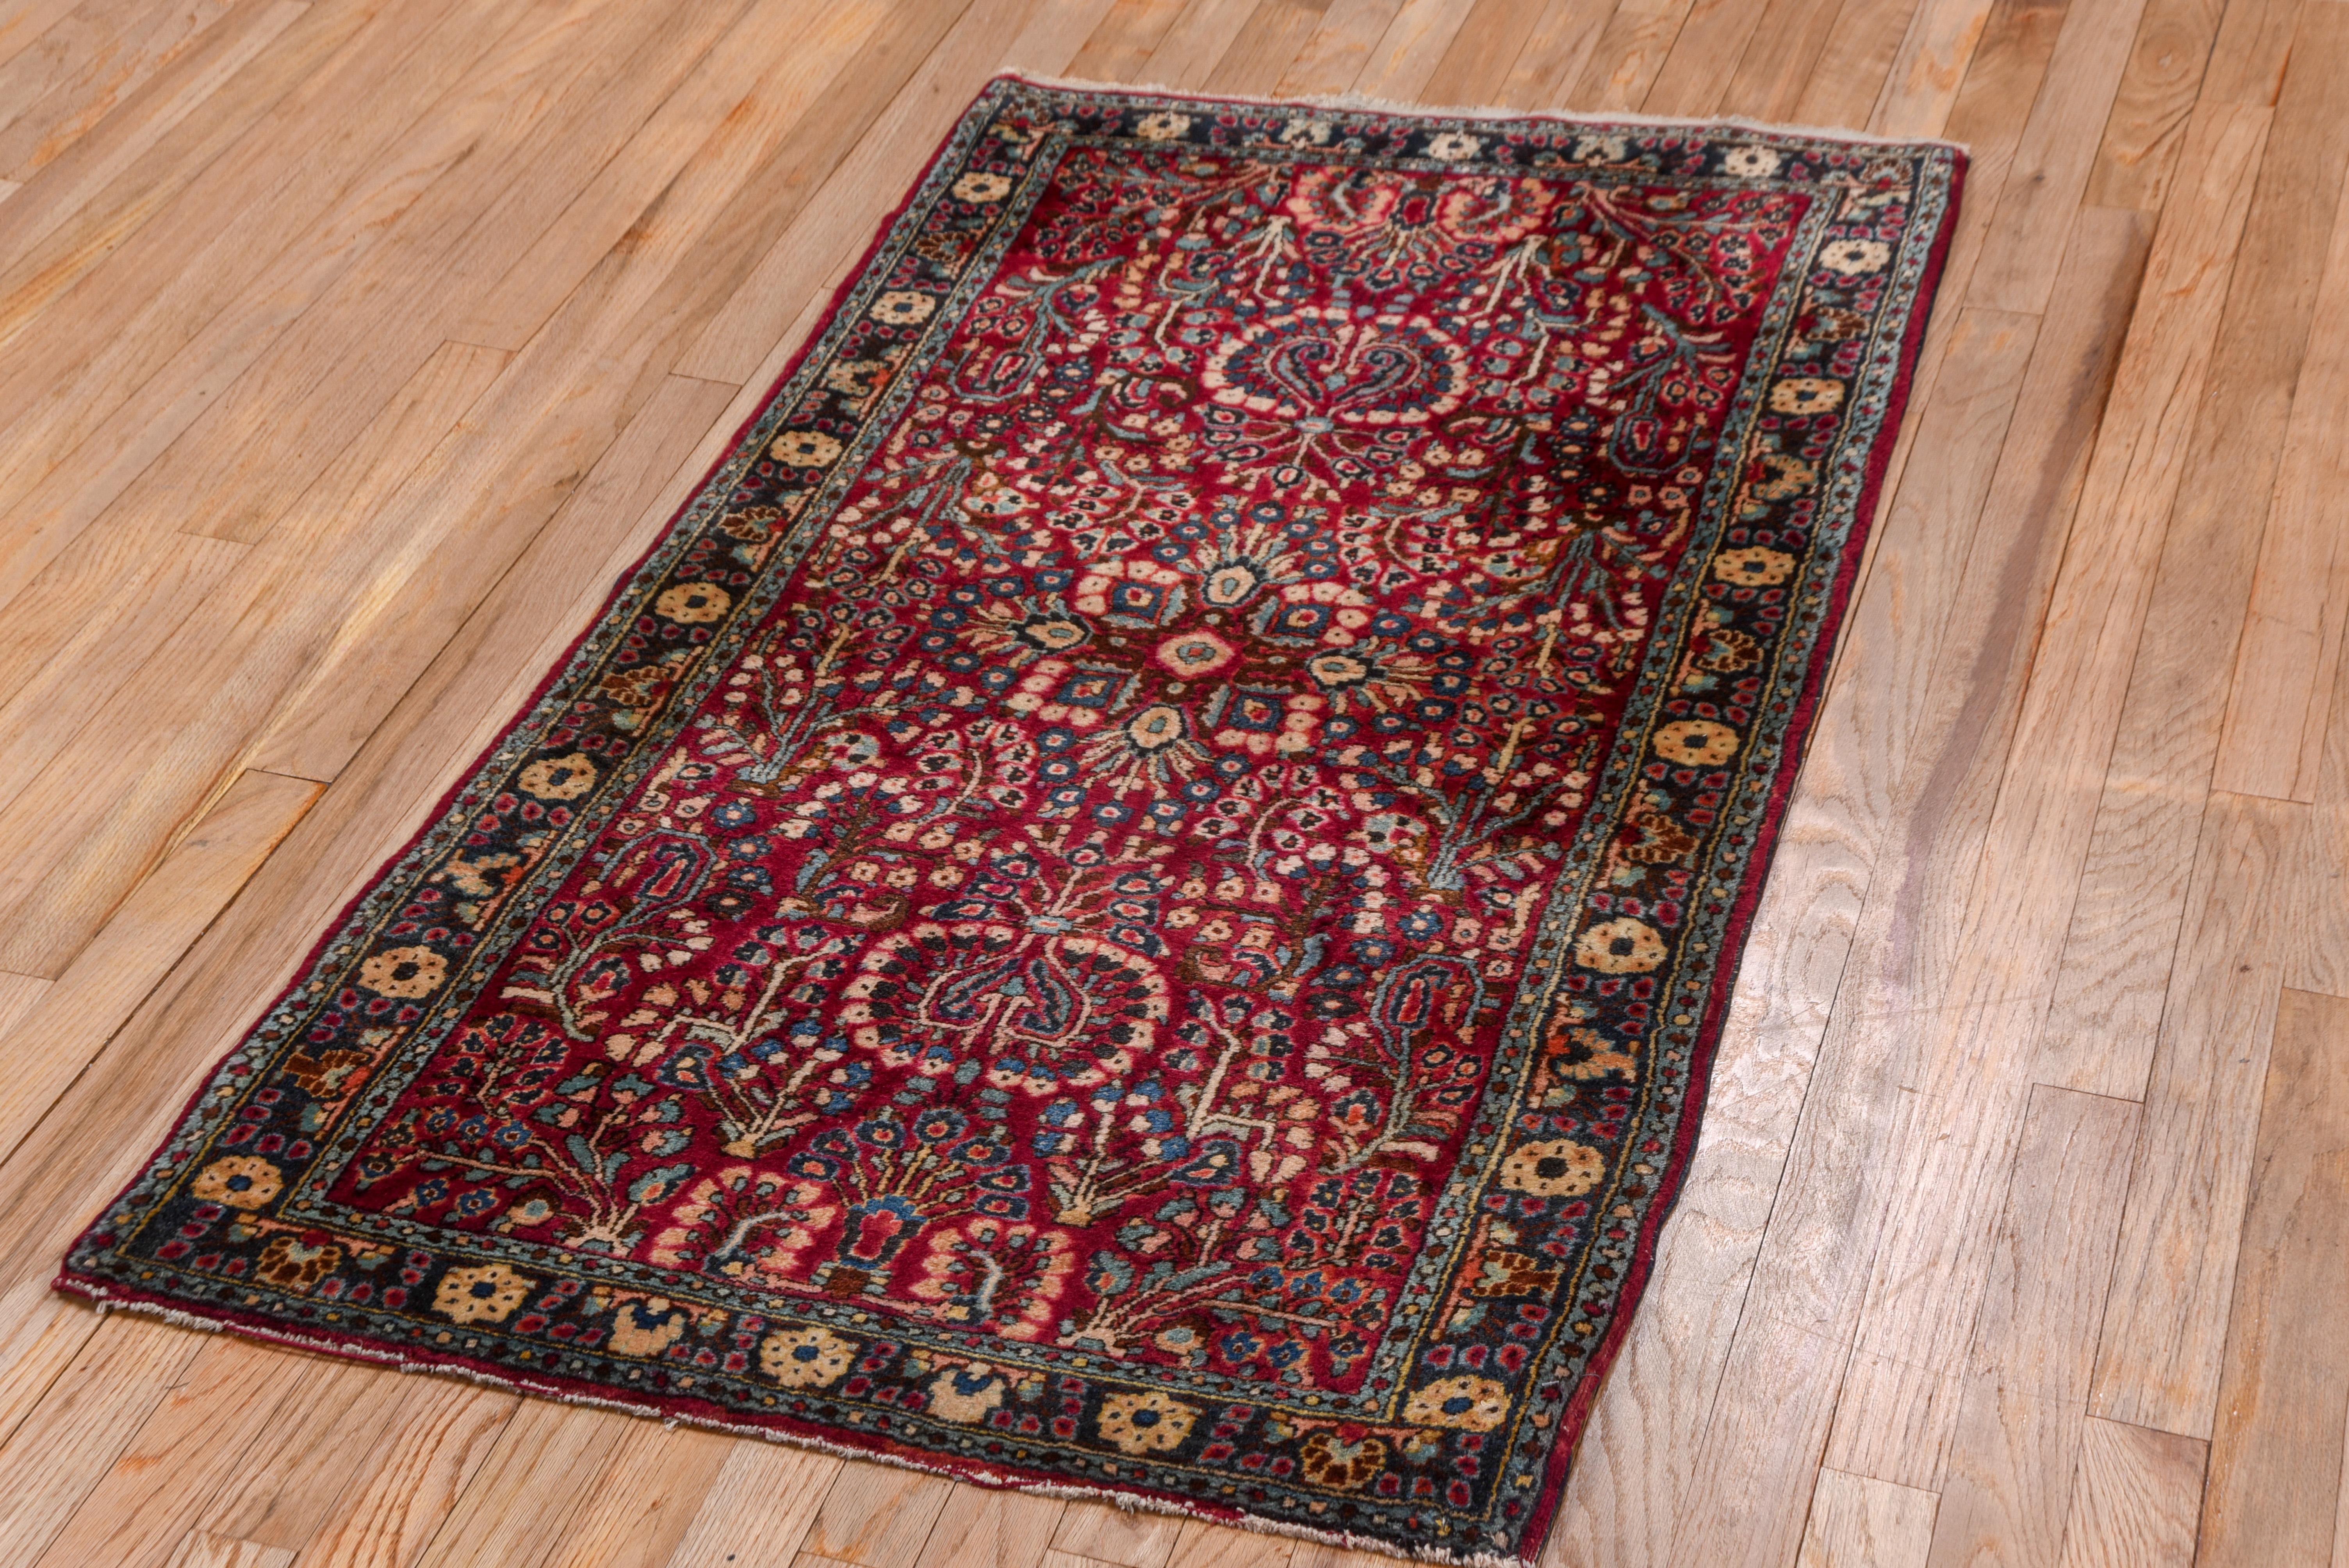 The cardinal red field of this leathery, well-woven West Persian small rustic scatter shows the characteristic 